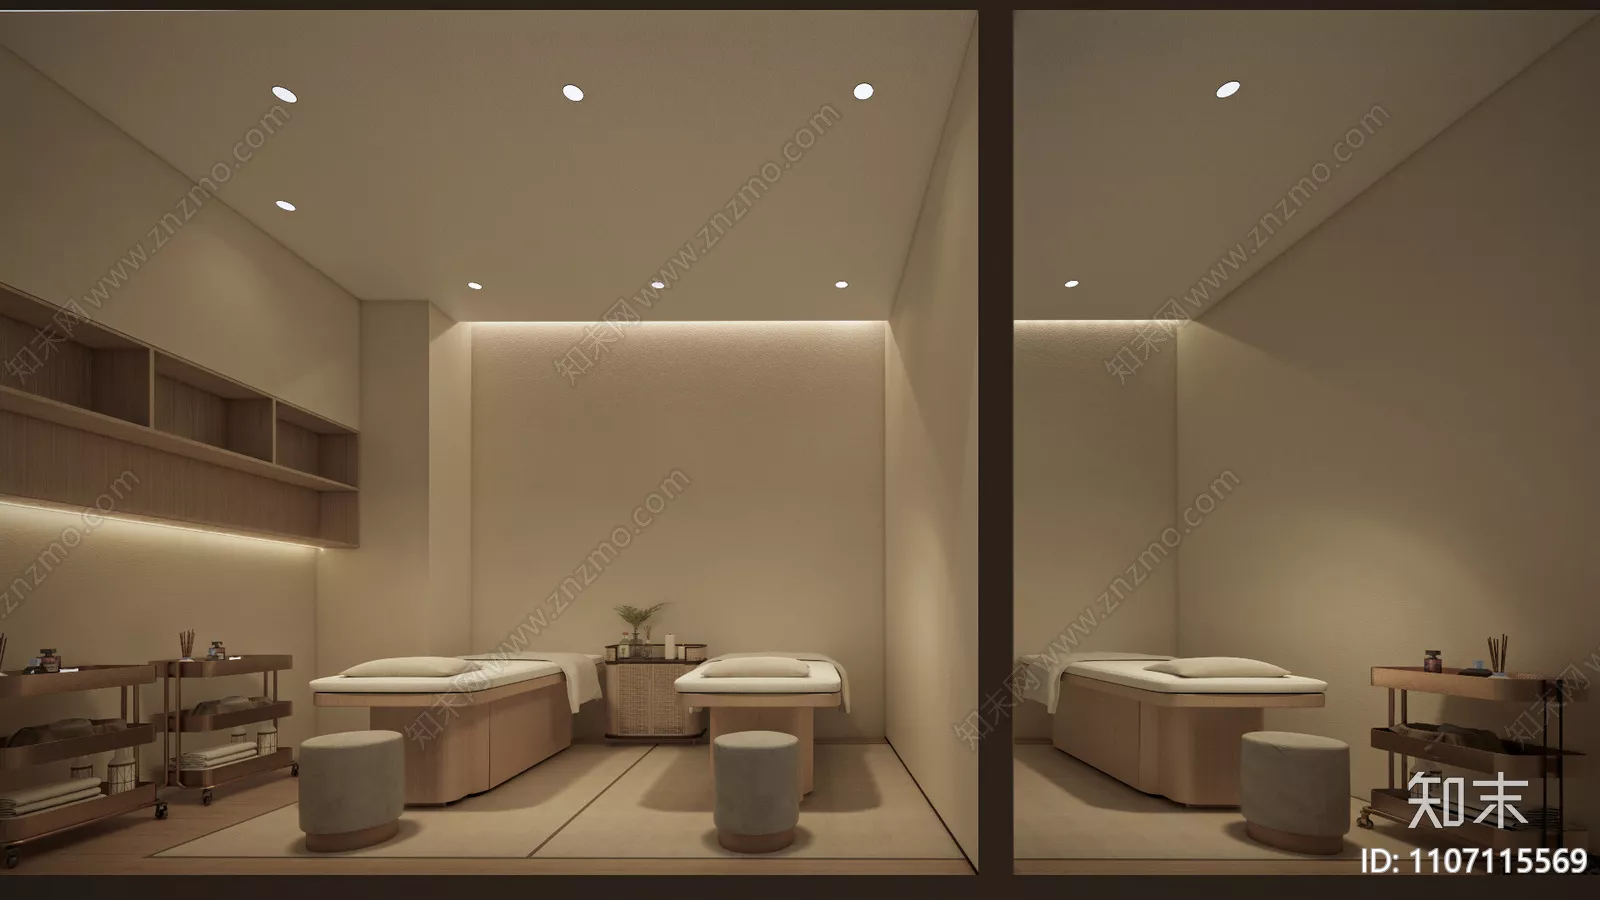 MODERN SPA AND BEAUTY - SKETCHUP 3D SCENE - VRAY OR ENSCAPE - ID14061